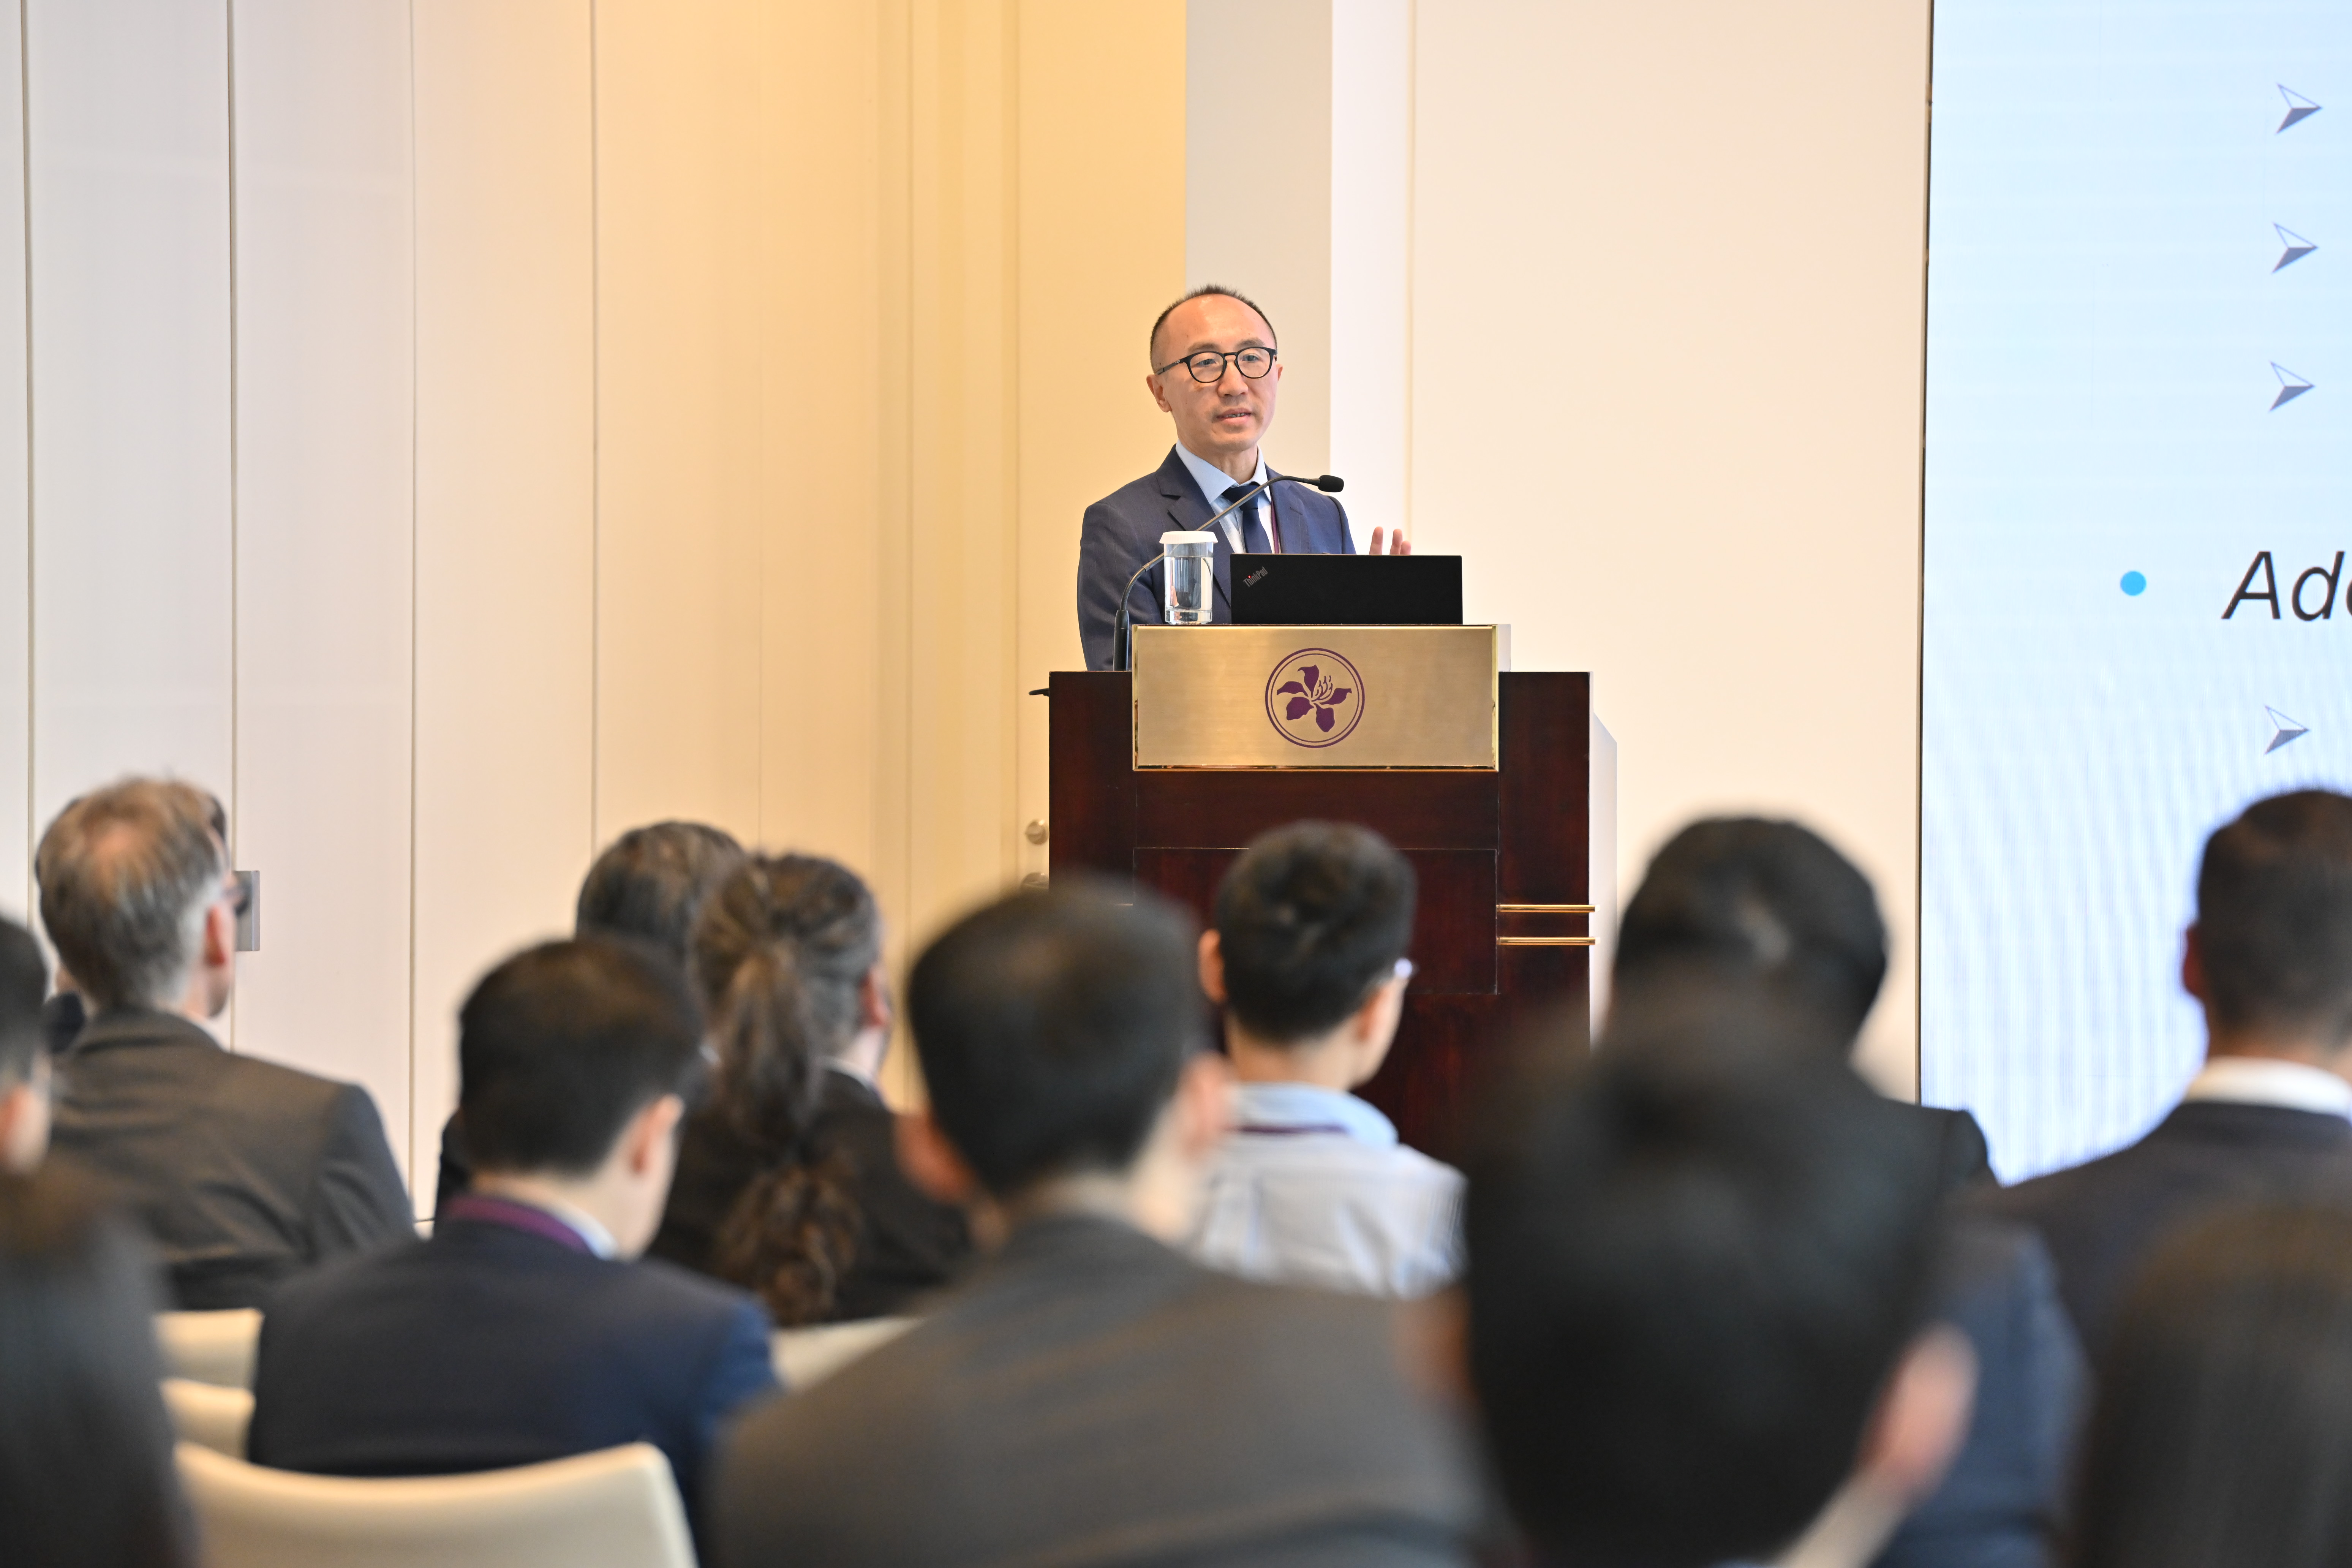 Dr. He Dong, Deputy Director, Monetary and Capital Markets Department of International Monetary Fund, delivers a keynote presentation on CBDC and monetary policy at the conference.